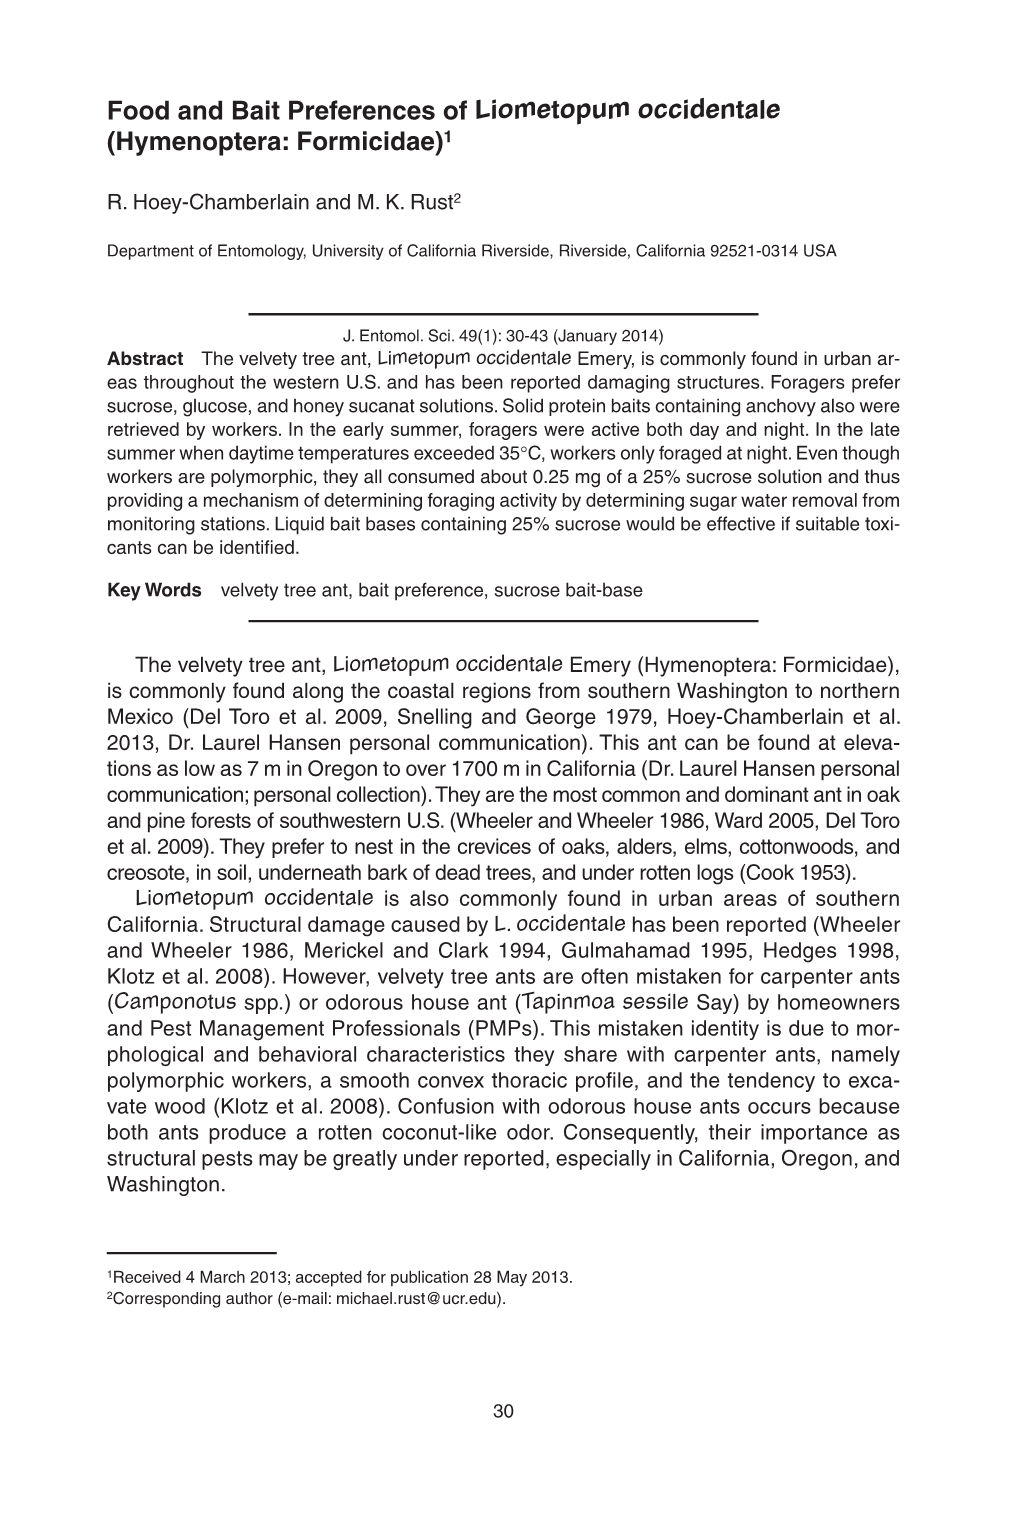 Food and Bait Preferences of Liometopum Occidentale (Hymenoptera: Formicidae)1